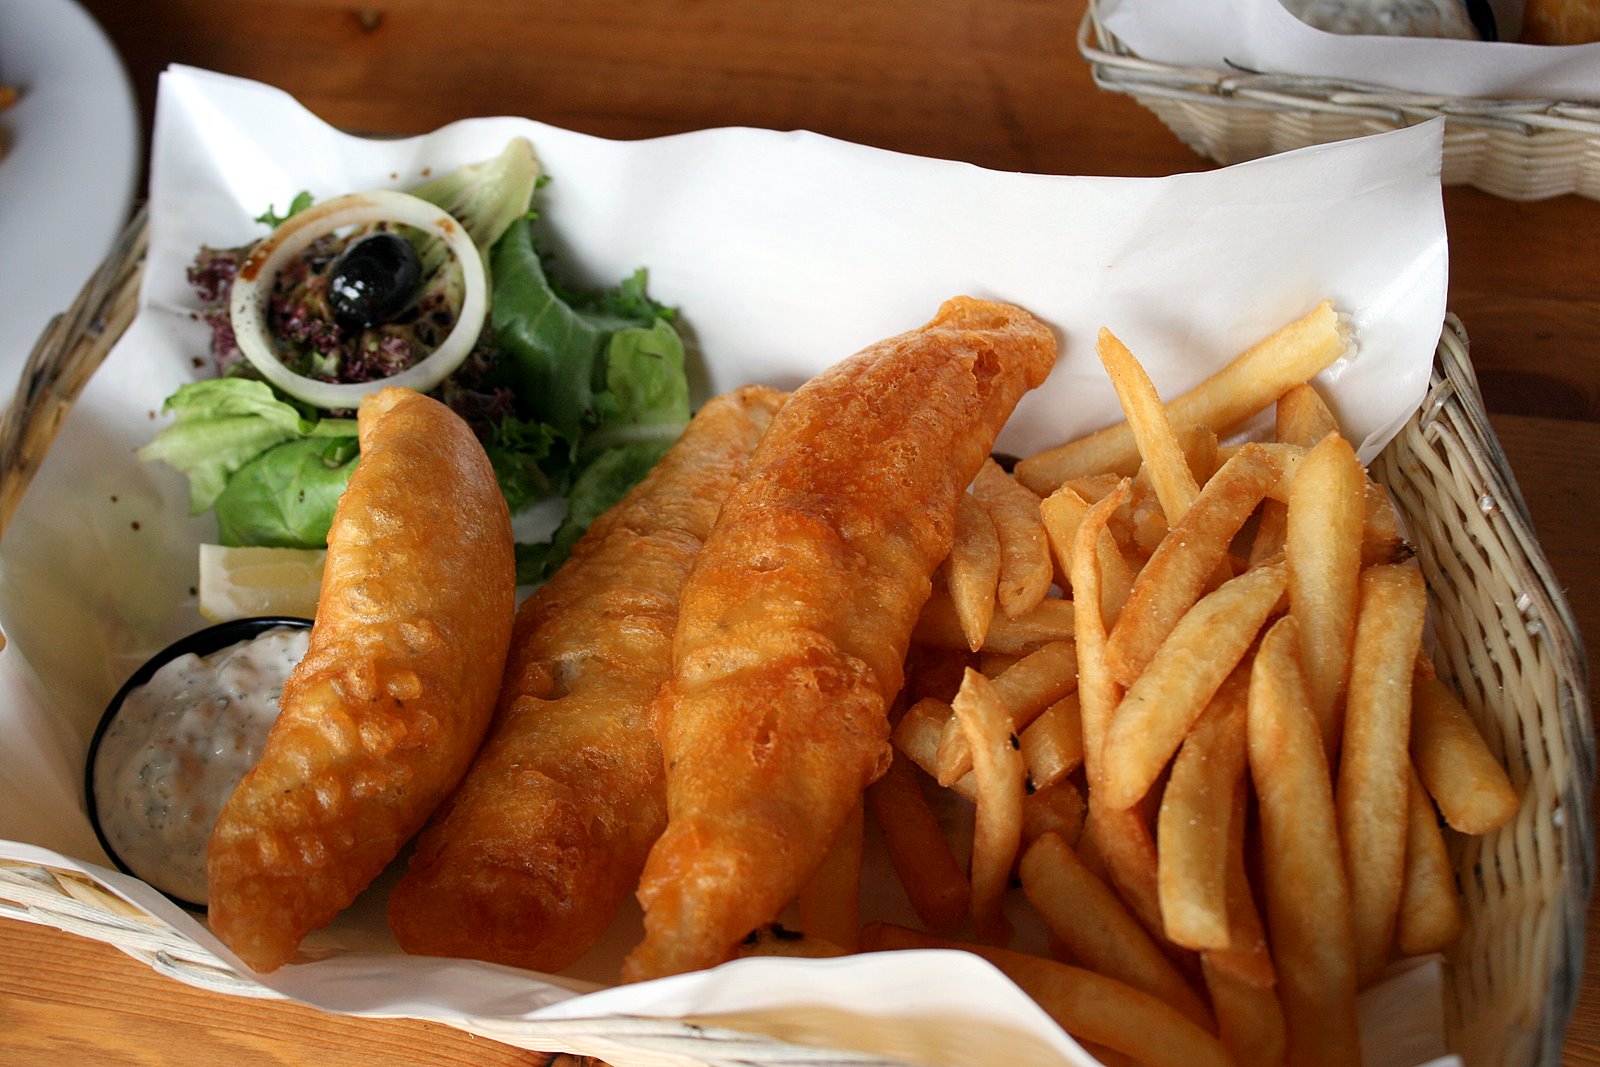 Beer battered fish and chips